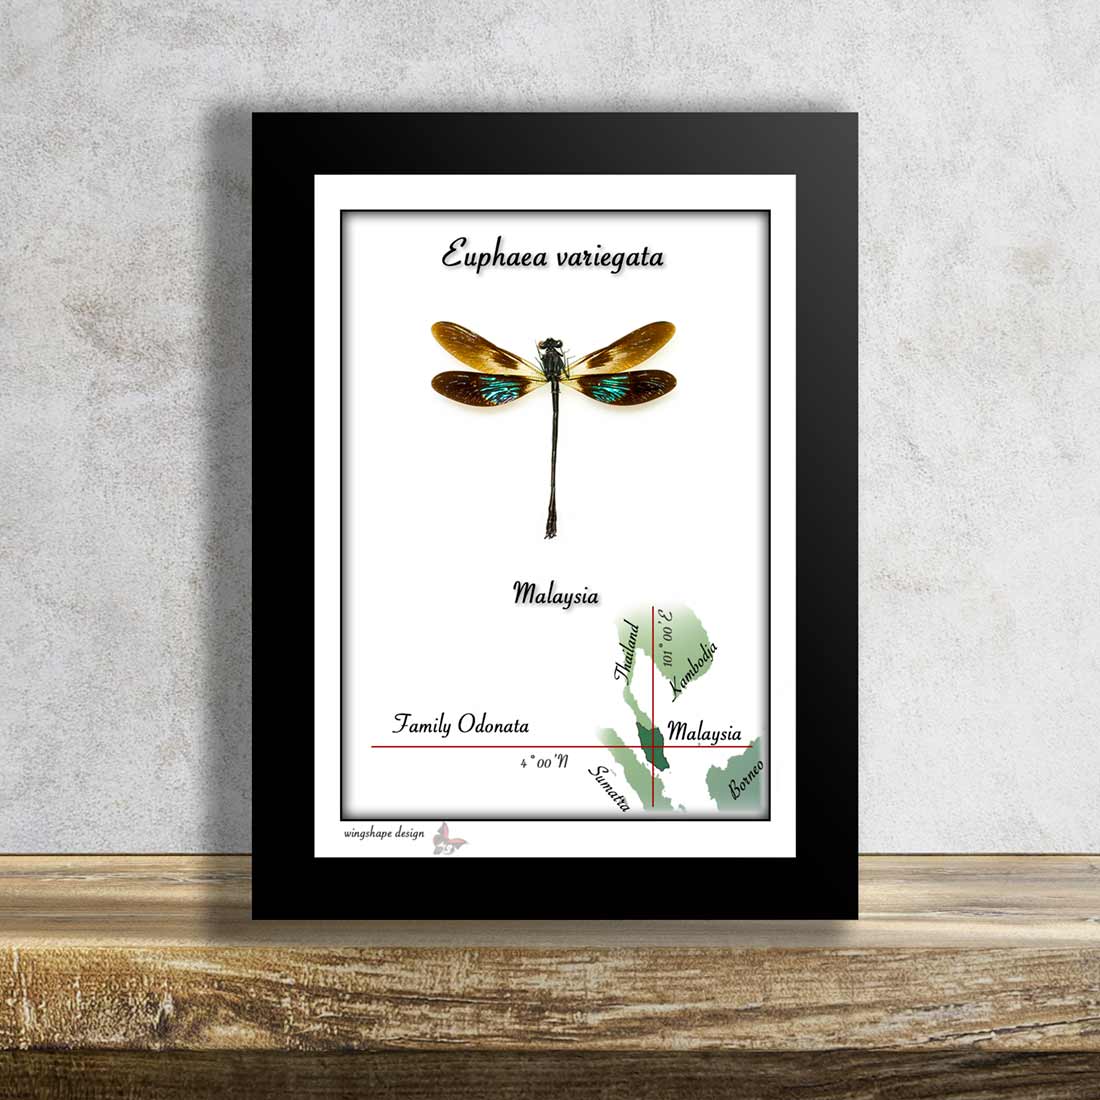 Tropical dragonfly in frame